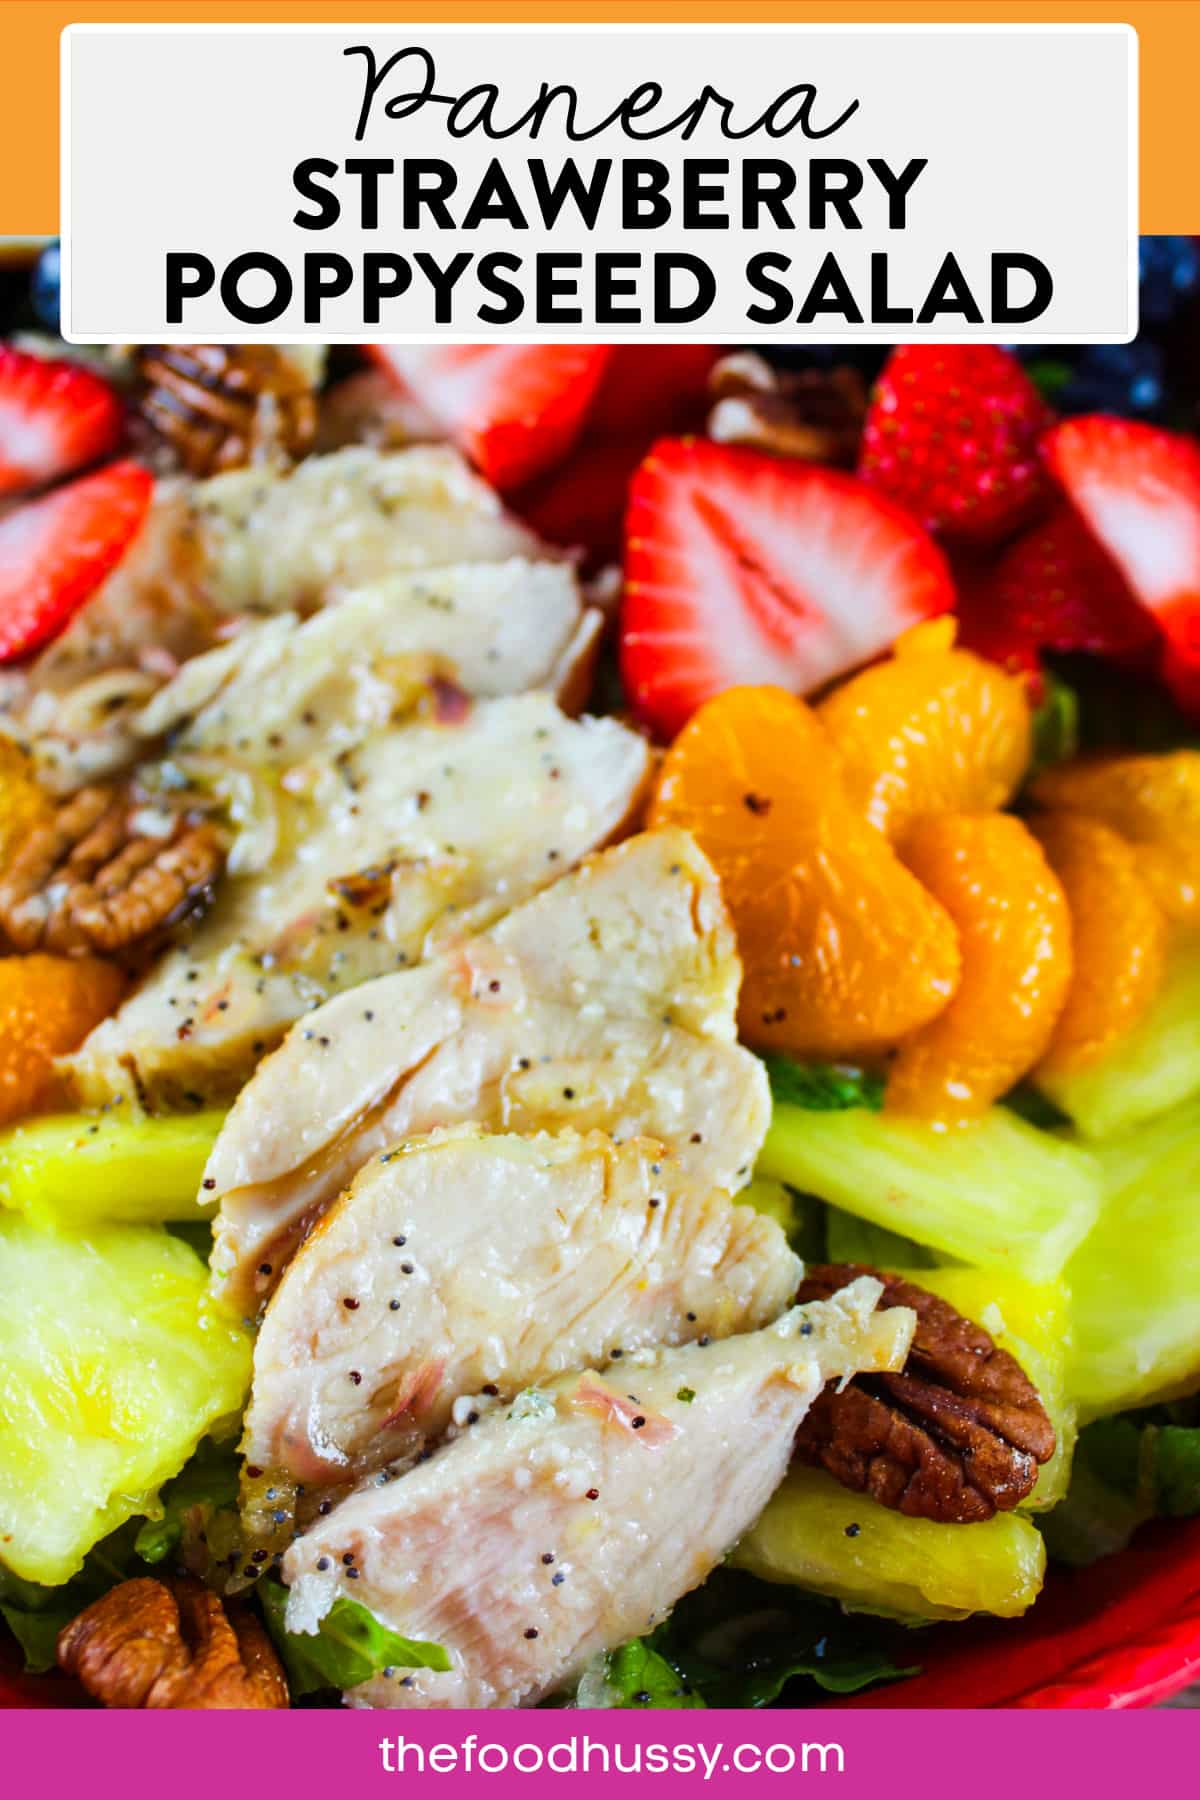 This Copycat Panera Strawberry Poppyseed Salad recipe has all the flavors of summer! This seasonal salad with crisp romaine lettuce and topped with fresh strawberries, blueberries and mandarin oranges. You'll also enjoy crunchy pecans and grilled chicken breast. Then the salad is dressed with their sweet & refreshing poppyseed dressing.  via @foodhussy